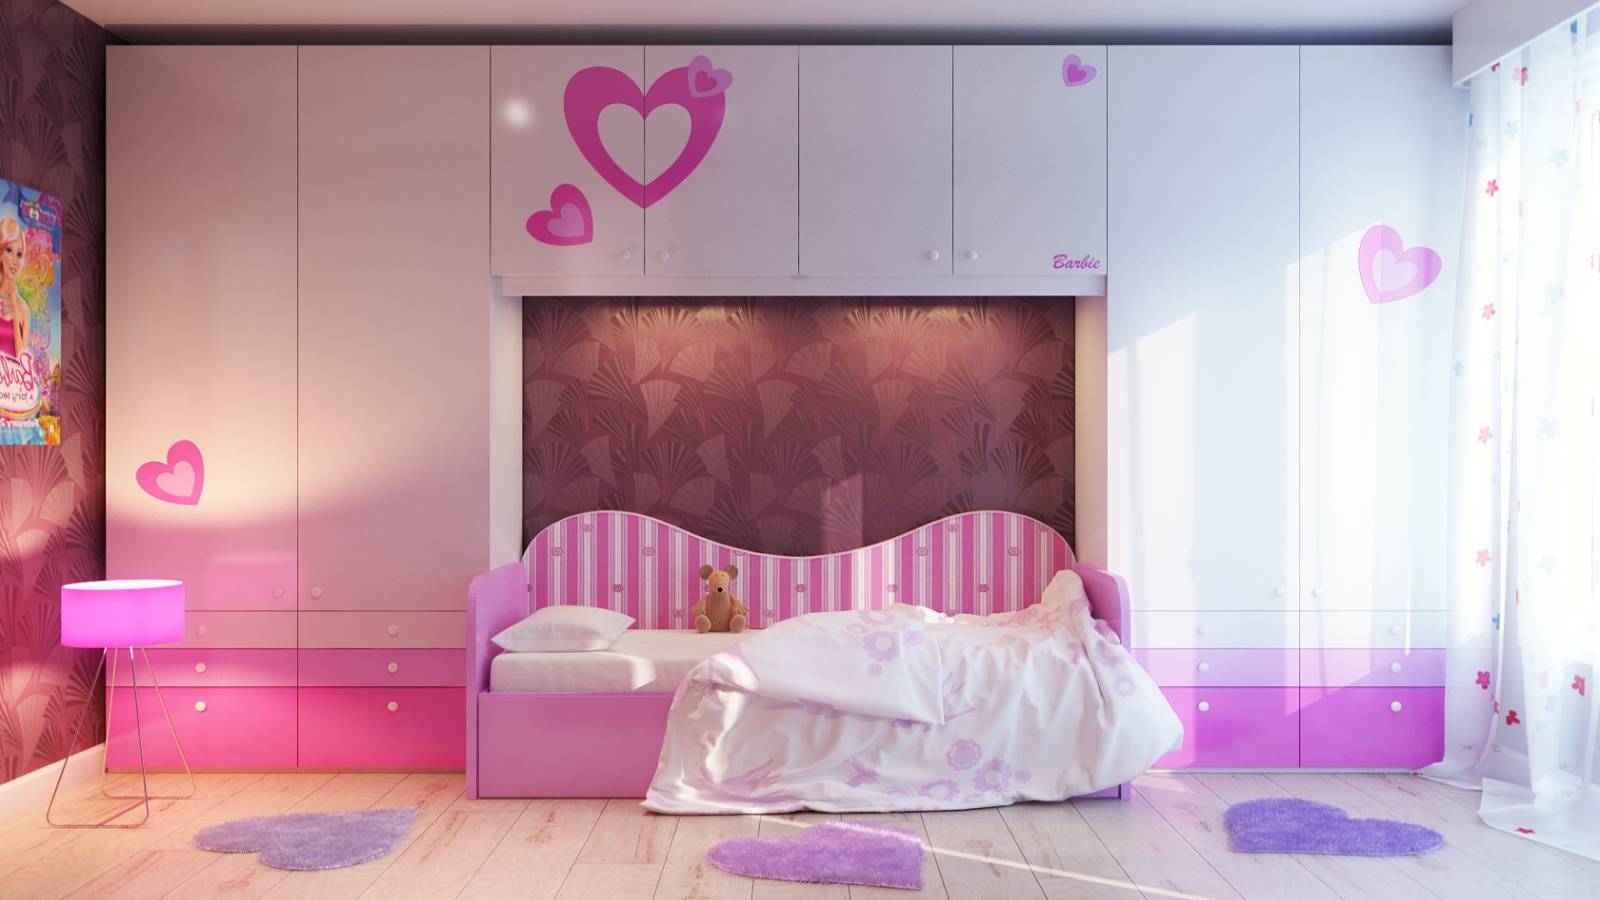 15 Beautiful and Unique Bedroom Designs for Girls